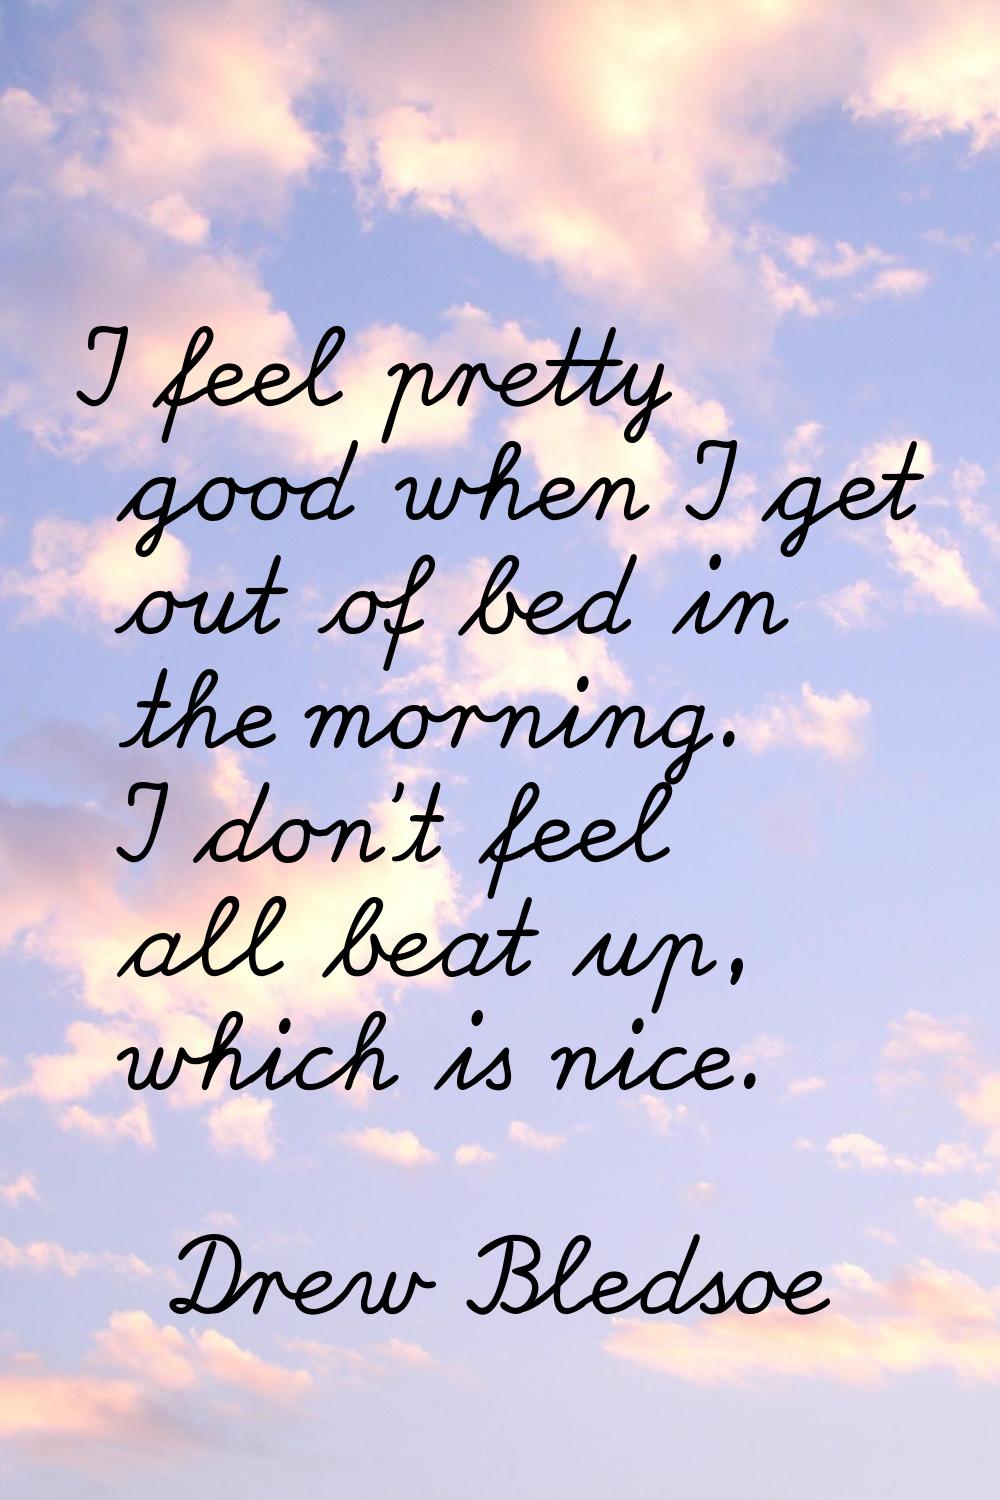 I feel pretty good when I get out of bed in the morning. I don't feel all beat up, which is nice.